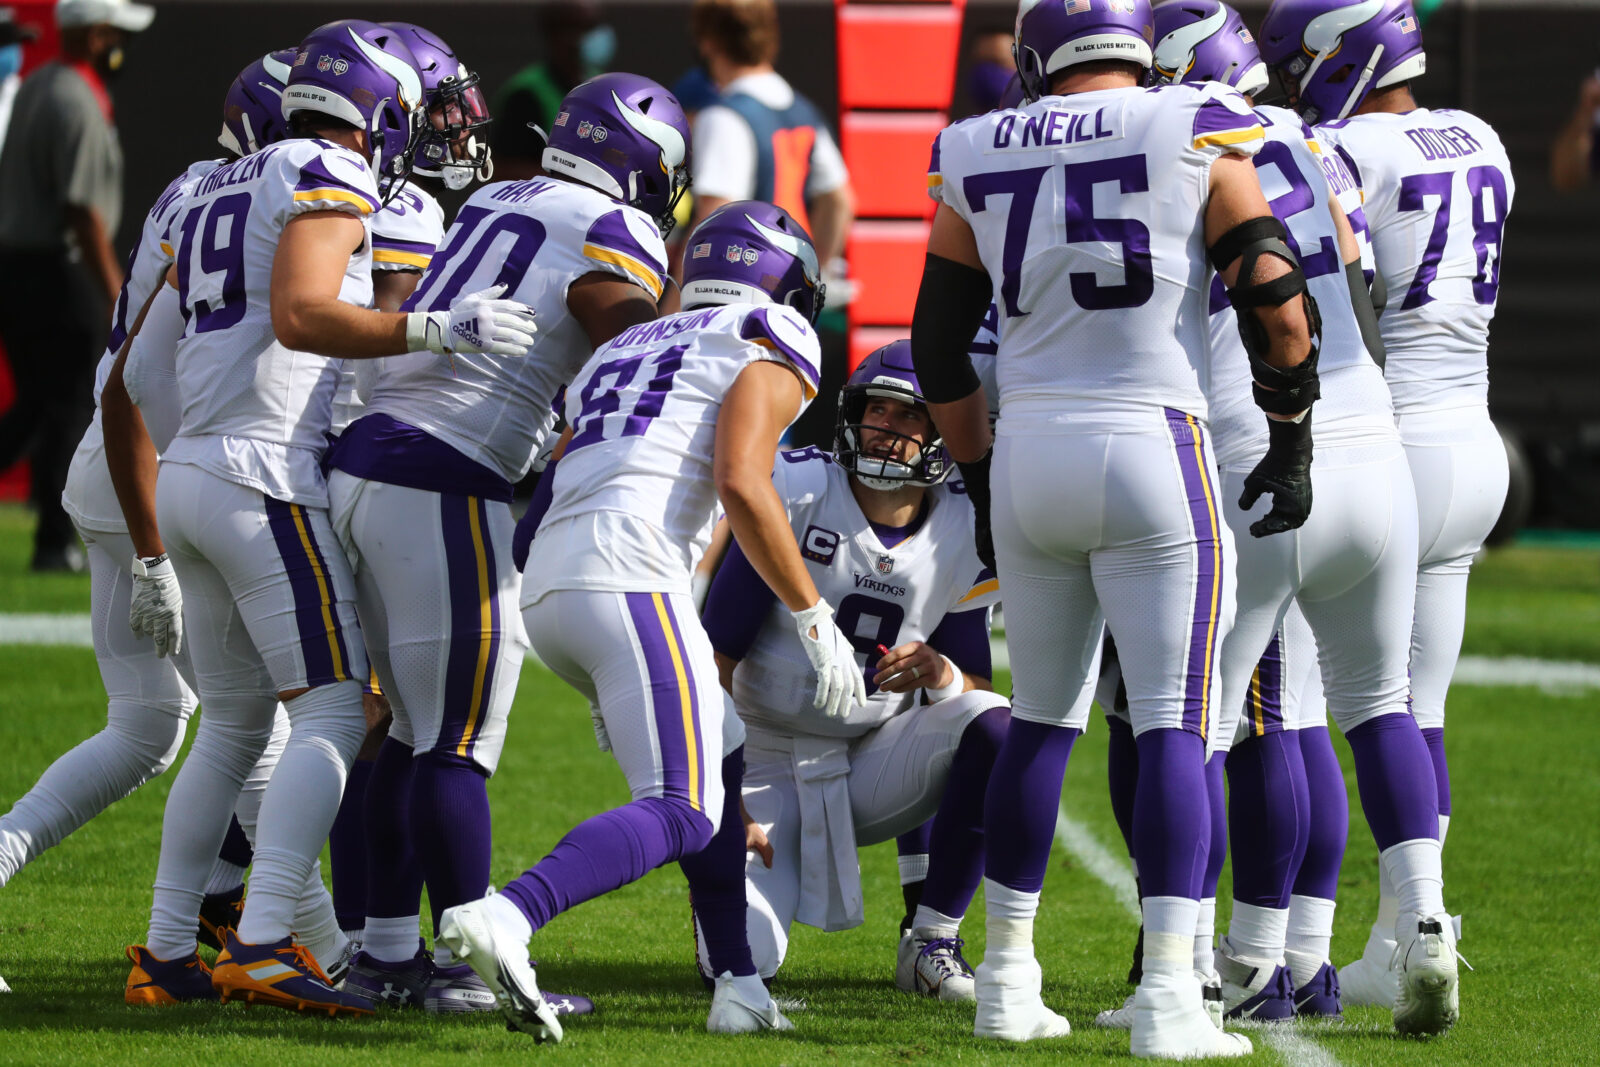 2023 Is Probably the End of Vikings Prolonged SB Window